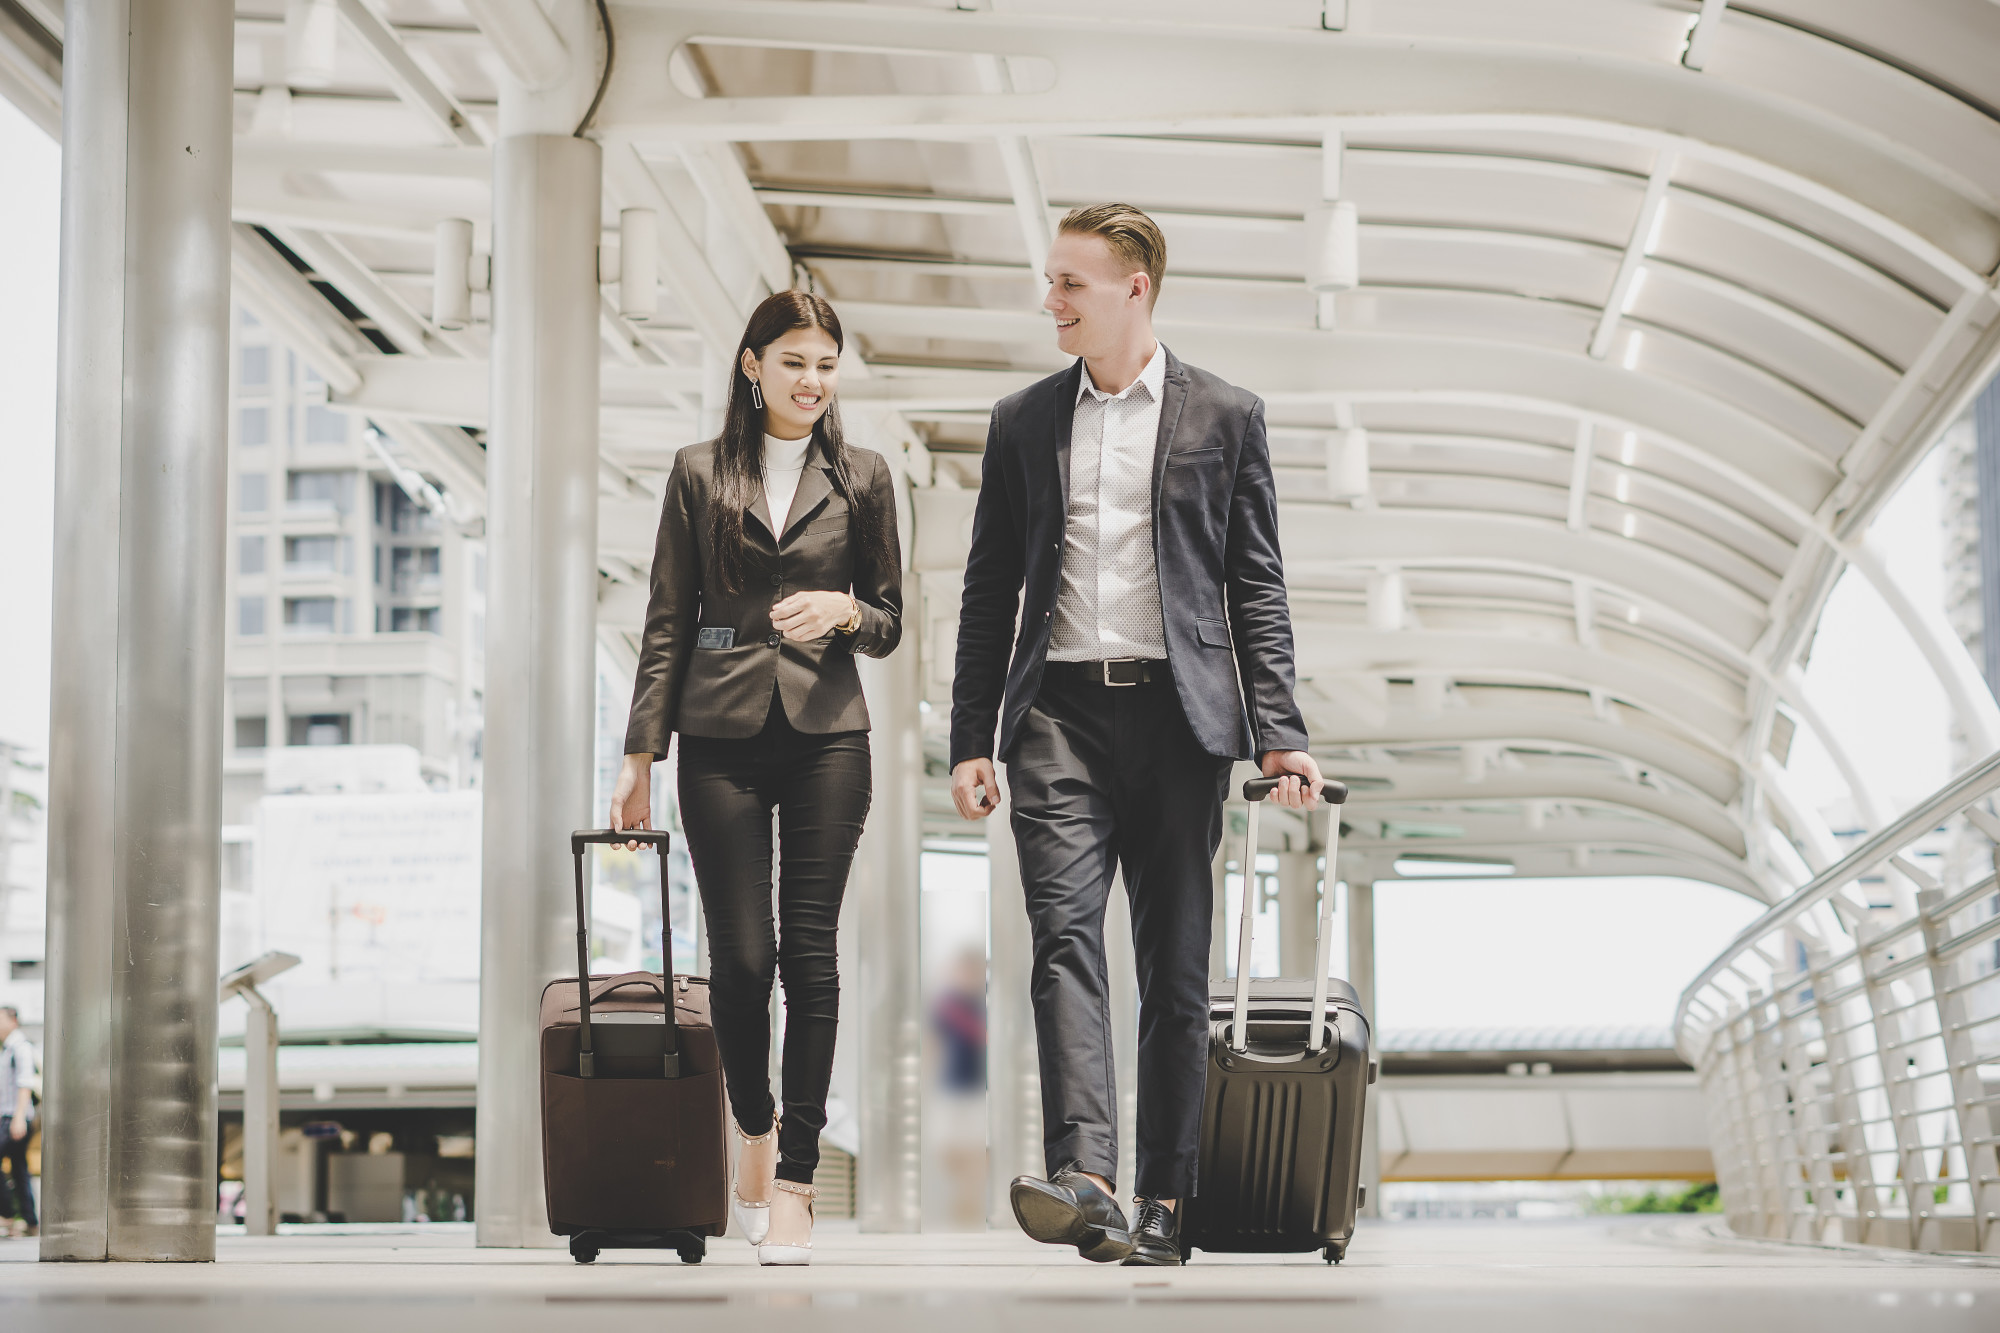 Chic & Professional: 6 Business Travel Outfits